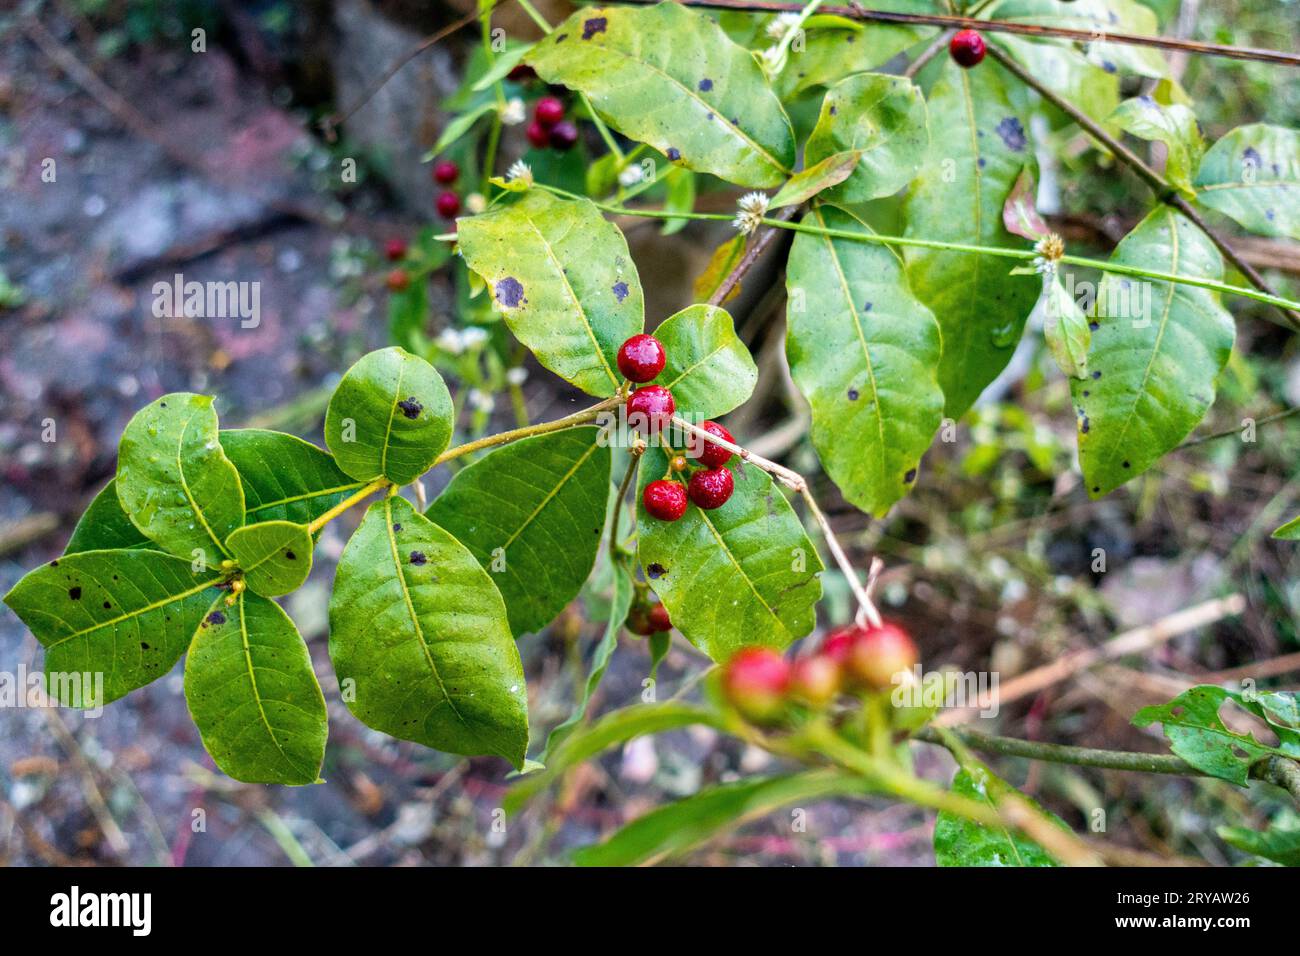 Red berries and leaves of Rauvolfia tetraphylla, known as the be still tree or devil-pepper, in Uttarakhand, India. Belongs to Apocynaceae family Stock Photo